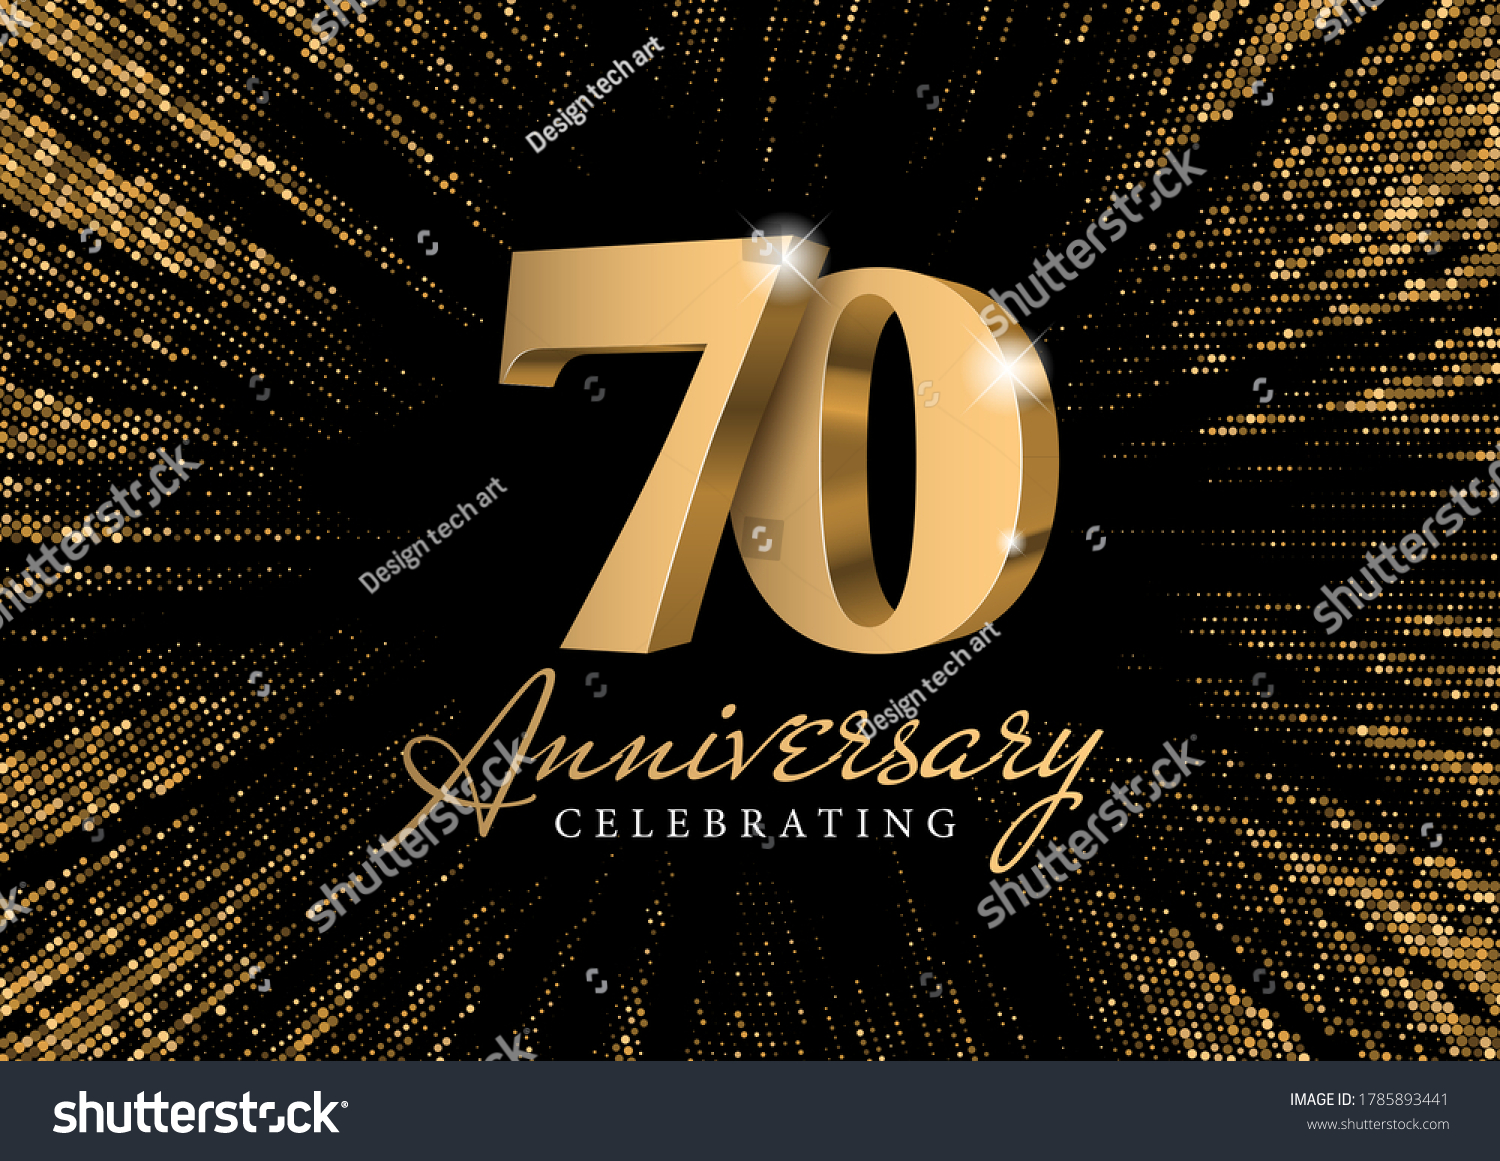 SVG of Anniversary 70. gold 3d numbers. Against the backdrop of a stylish flash of gold sparkling from the center on a black background. Poster template for Celebrating 70th anniversary event party. Vector svg